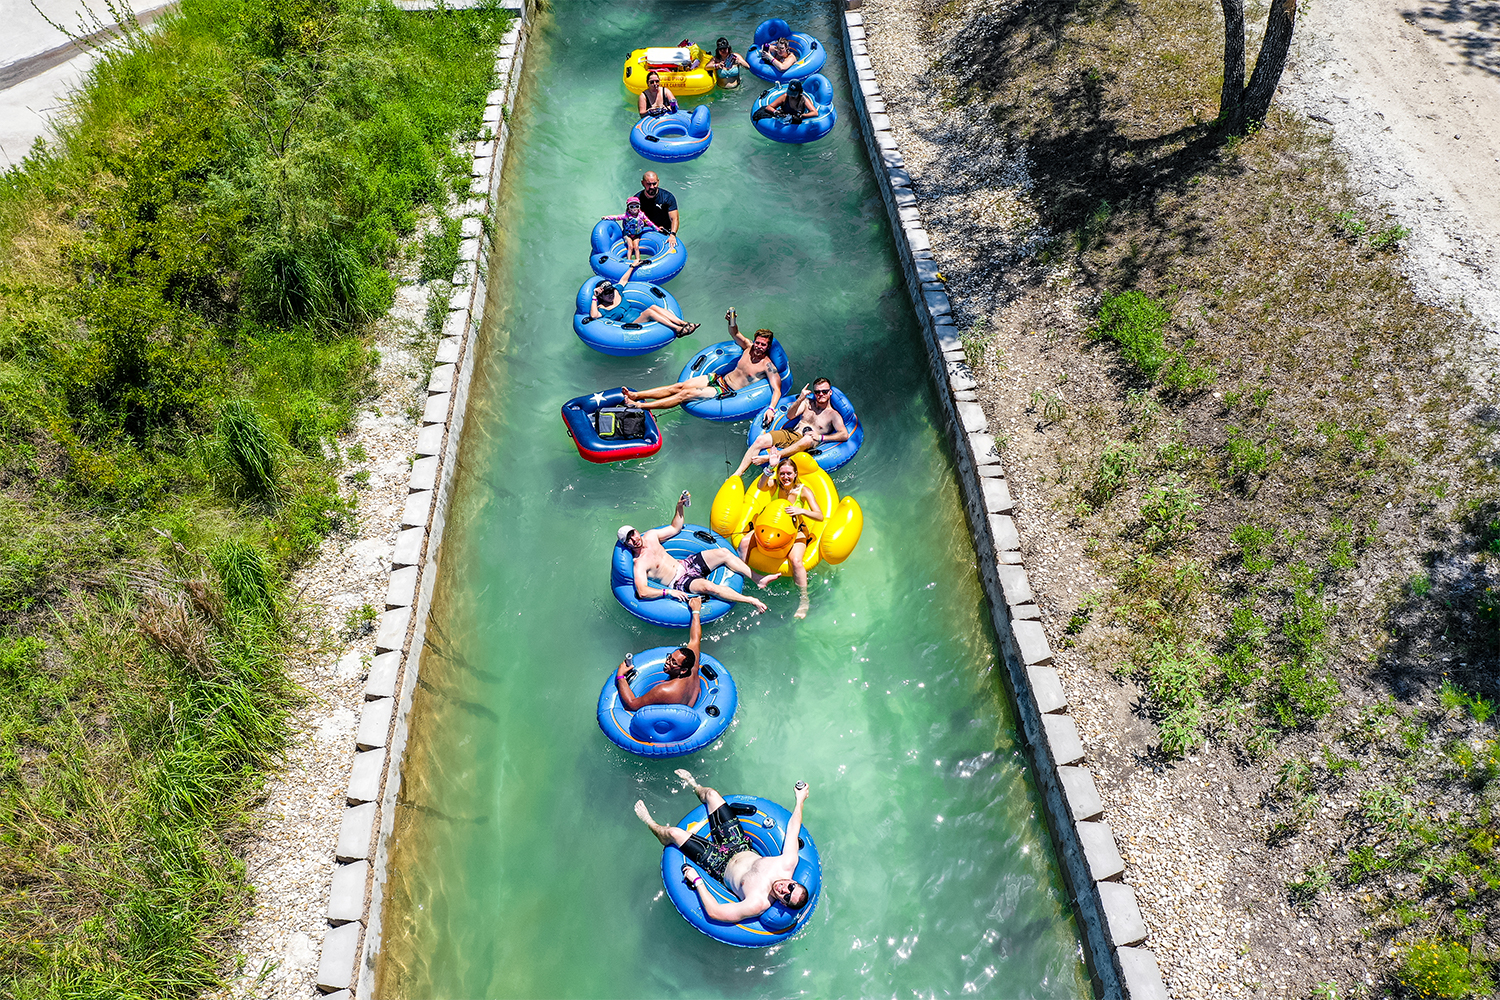 People on inner tubes on the lazy river at Waco Surf in Texas